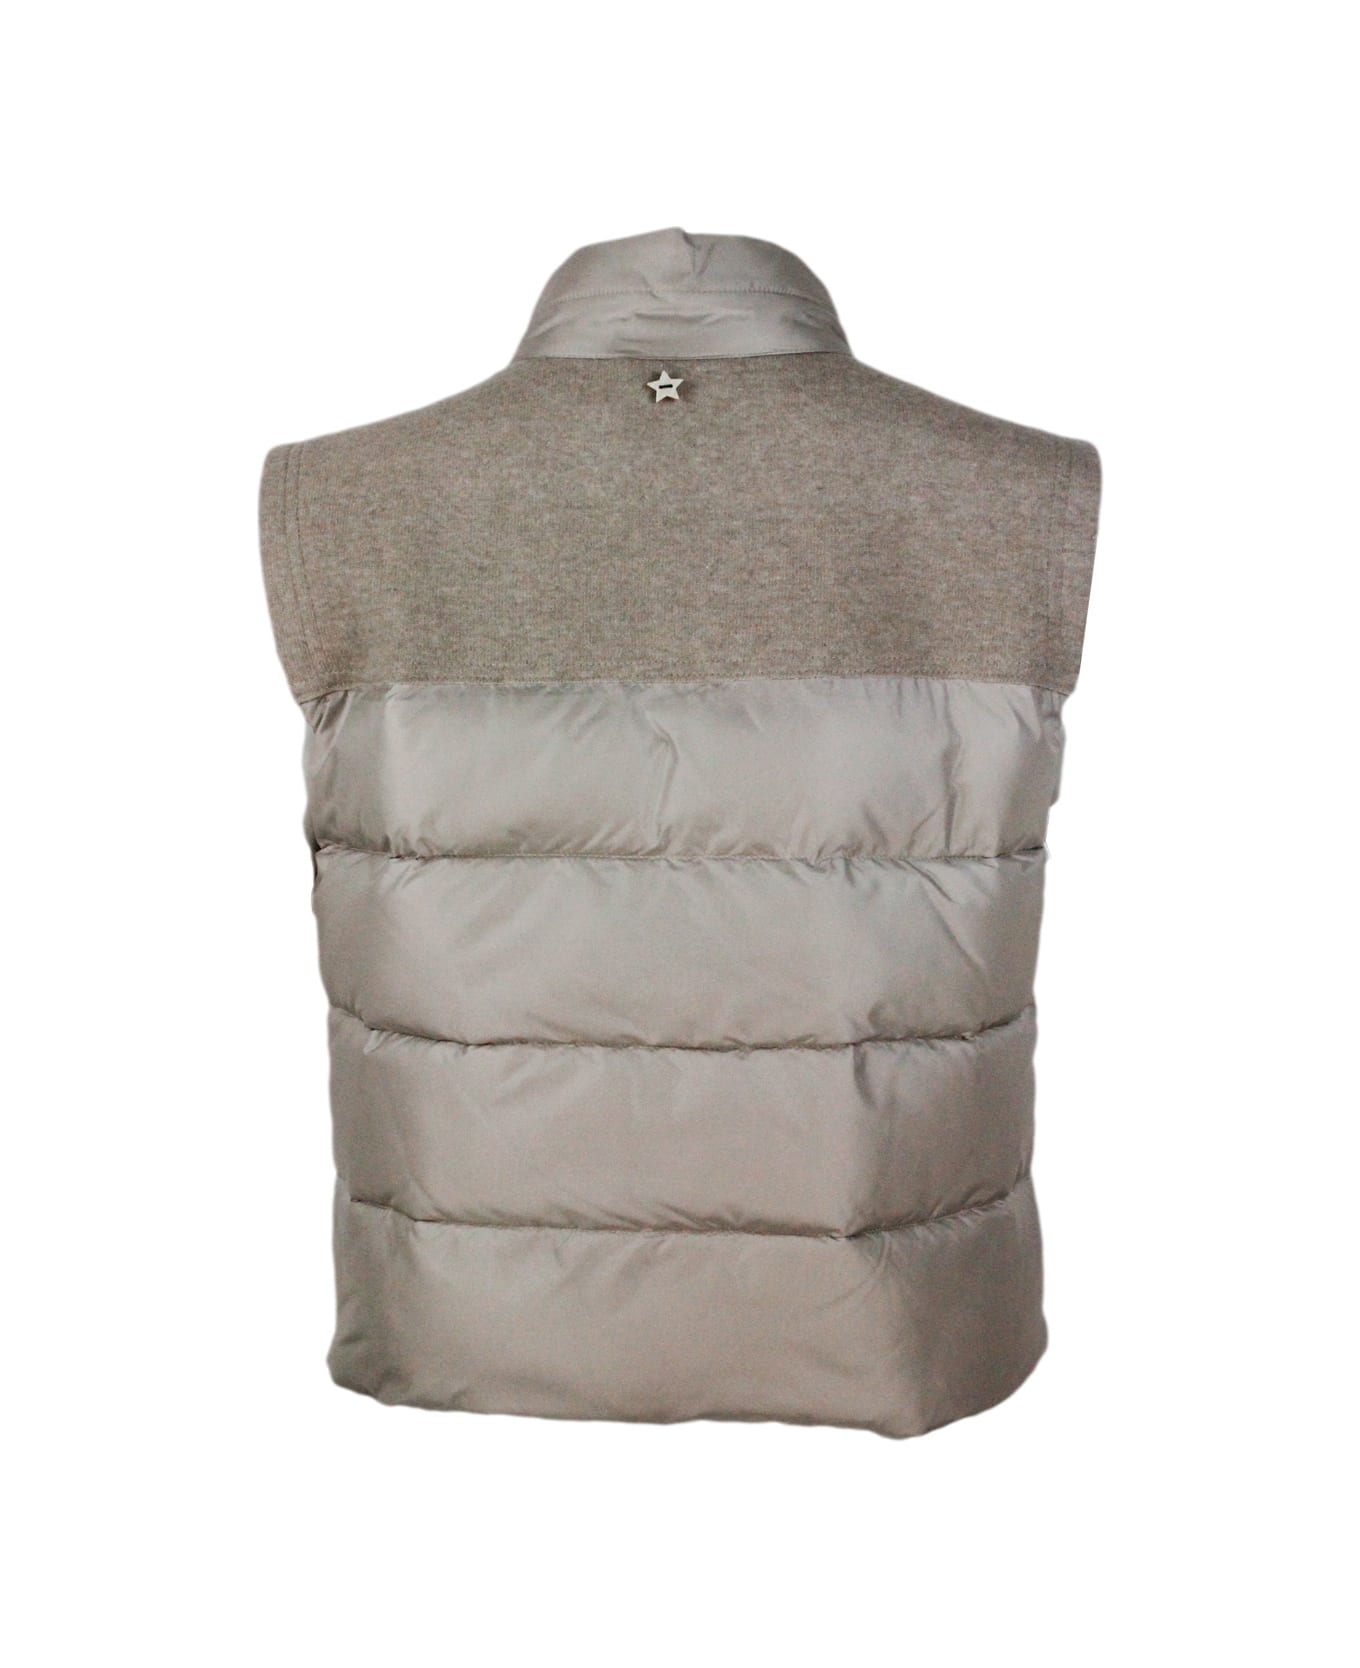 Lorena Antoniazzi Sleeveless Vest Padded With Real Goose Down With Fine Wool Inserts On The Shoulders And Zip Closure - Beige